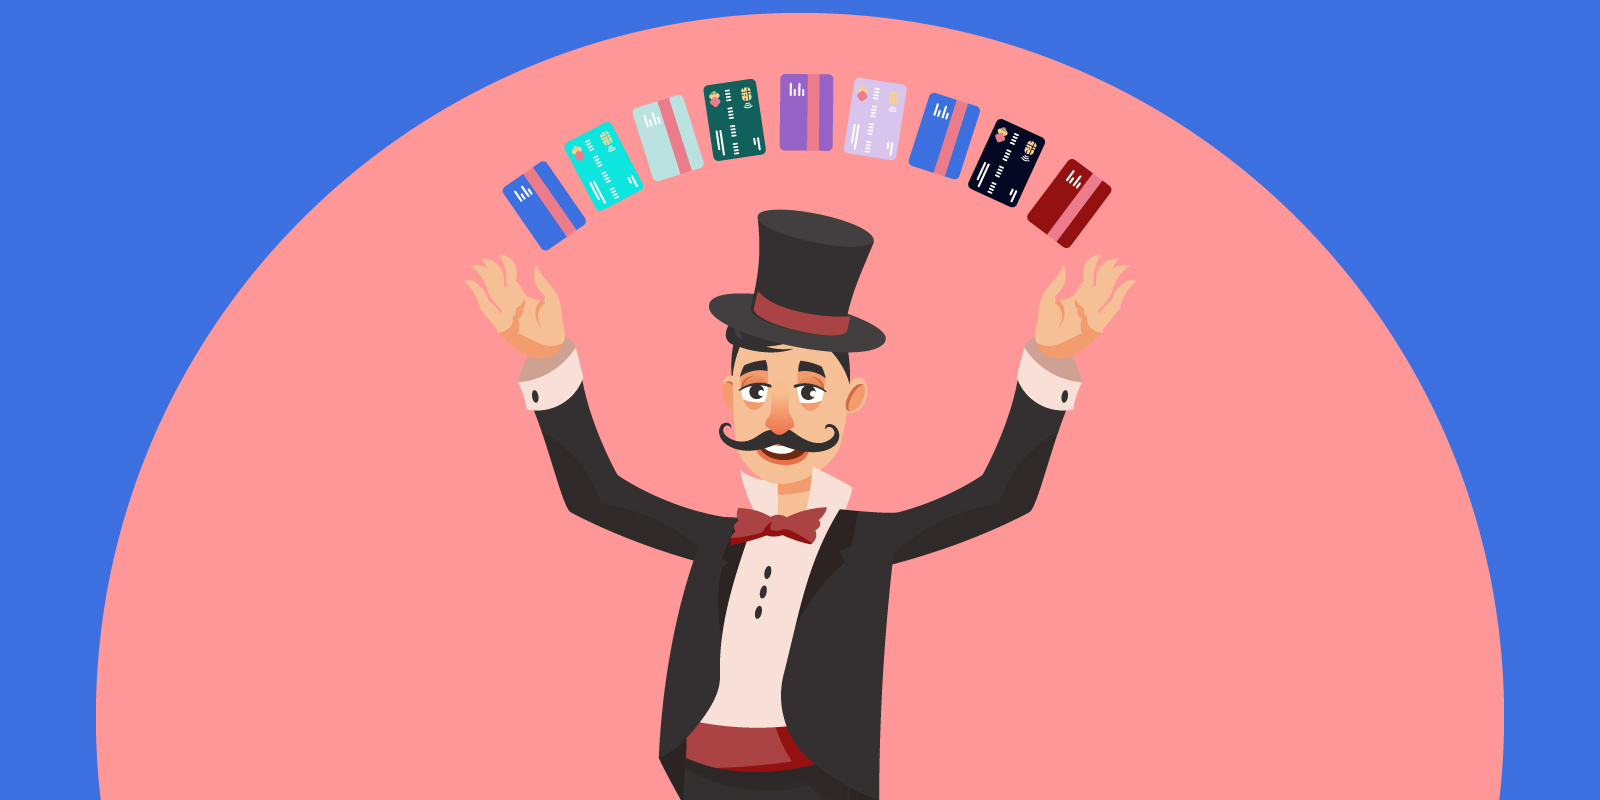 Infographic of a magician man with a fan of various credit cards